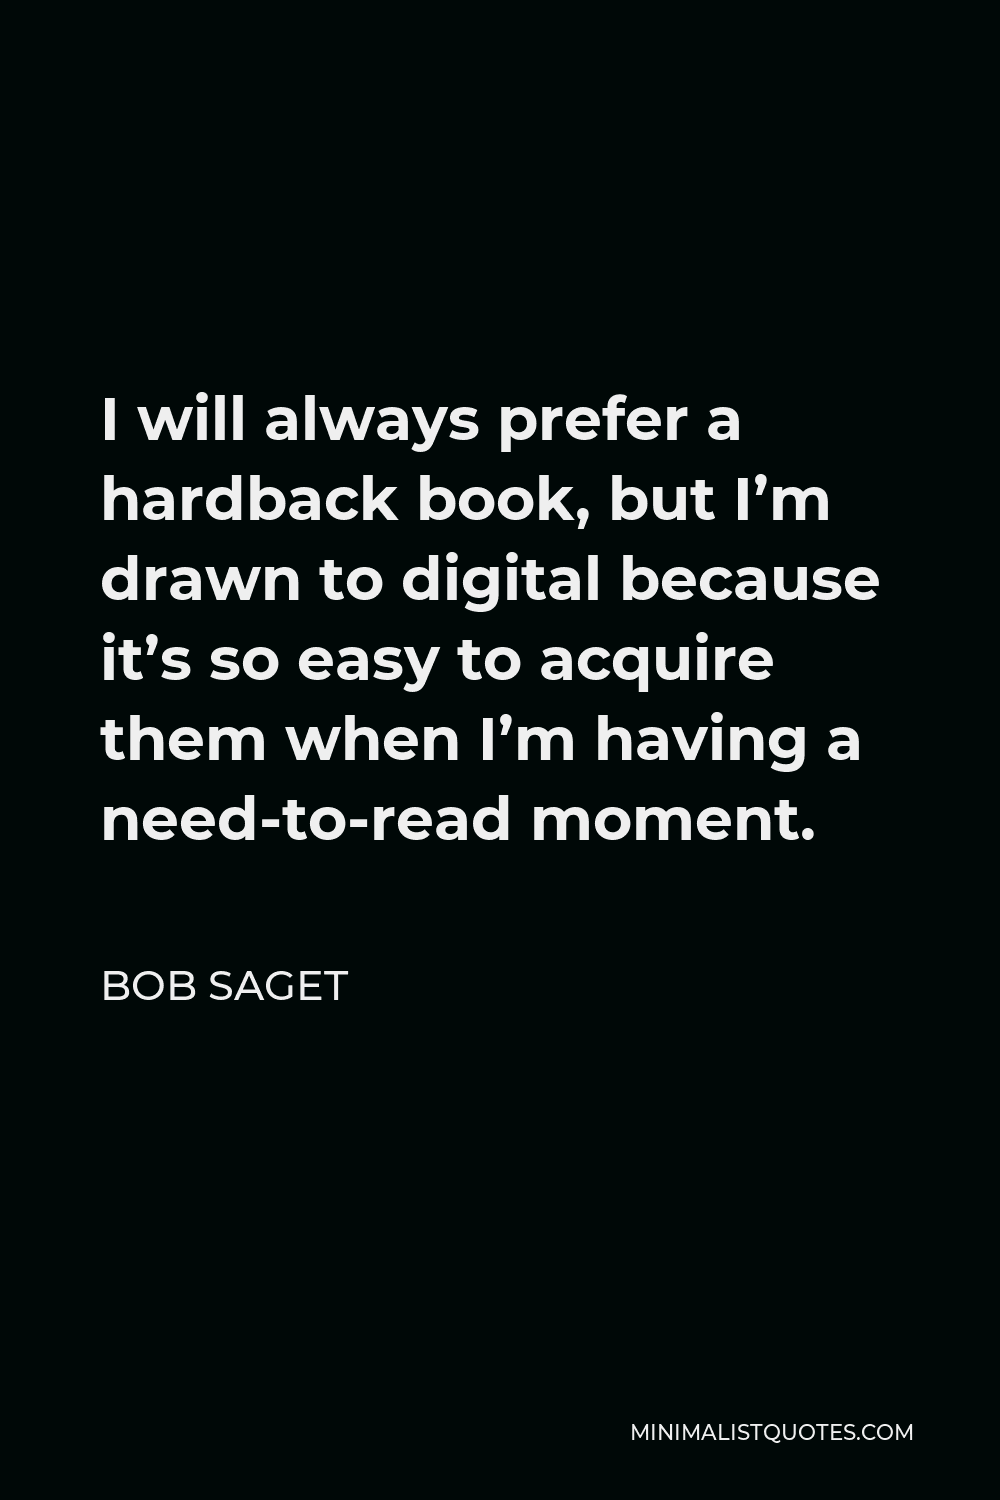 Bob Saget Quote - I will always prefer a hardback book, but I’m drawn to digital because it’s so easy to acquire them when I’m having a need-to-read moment.